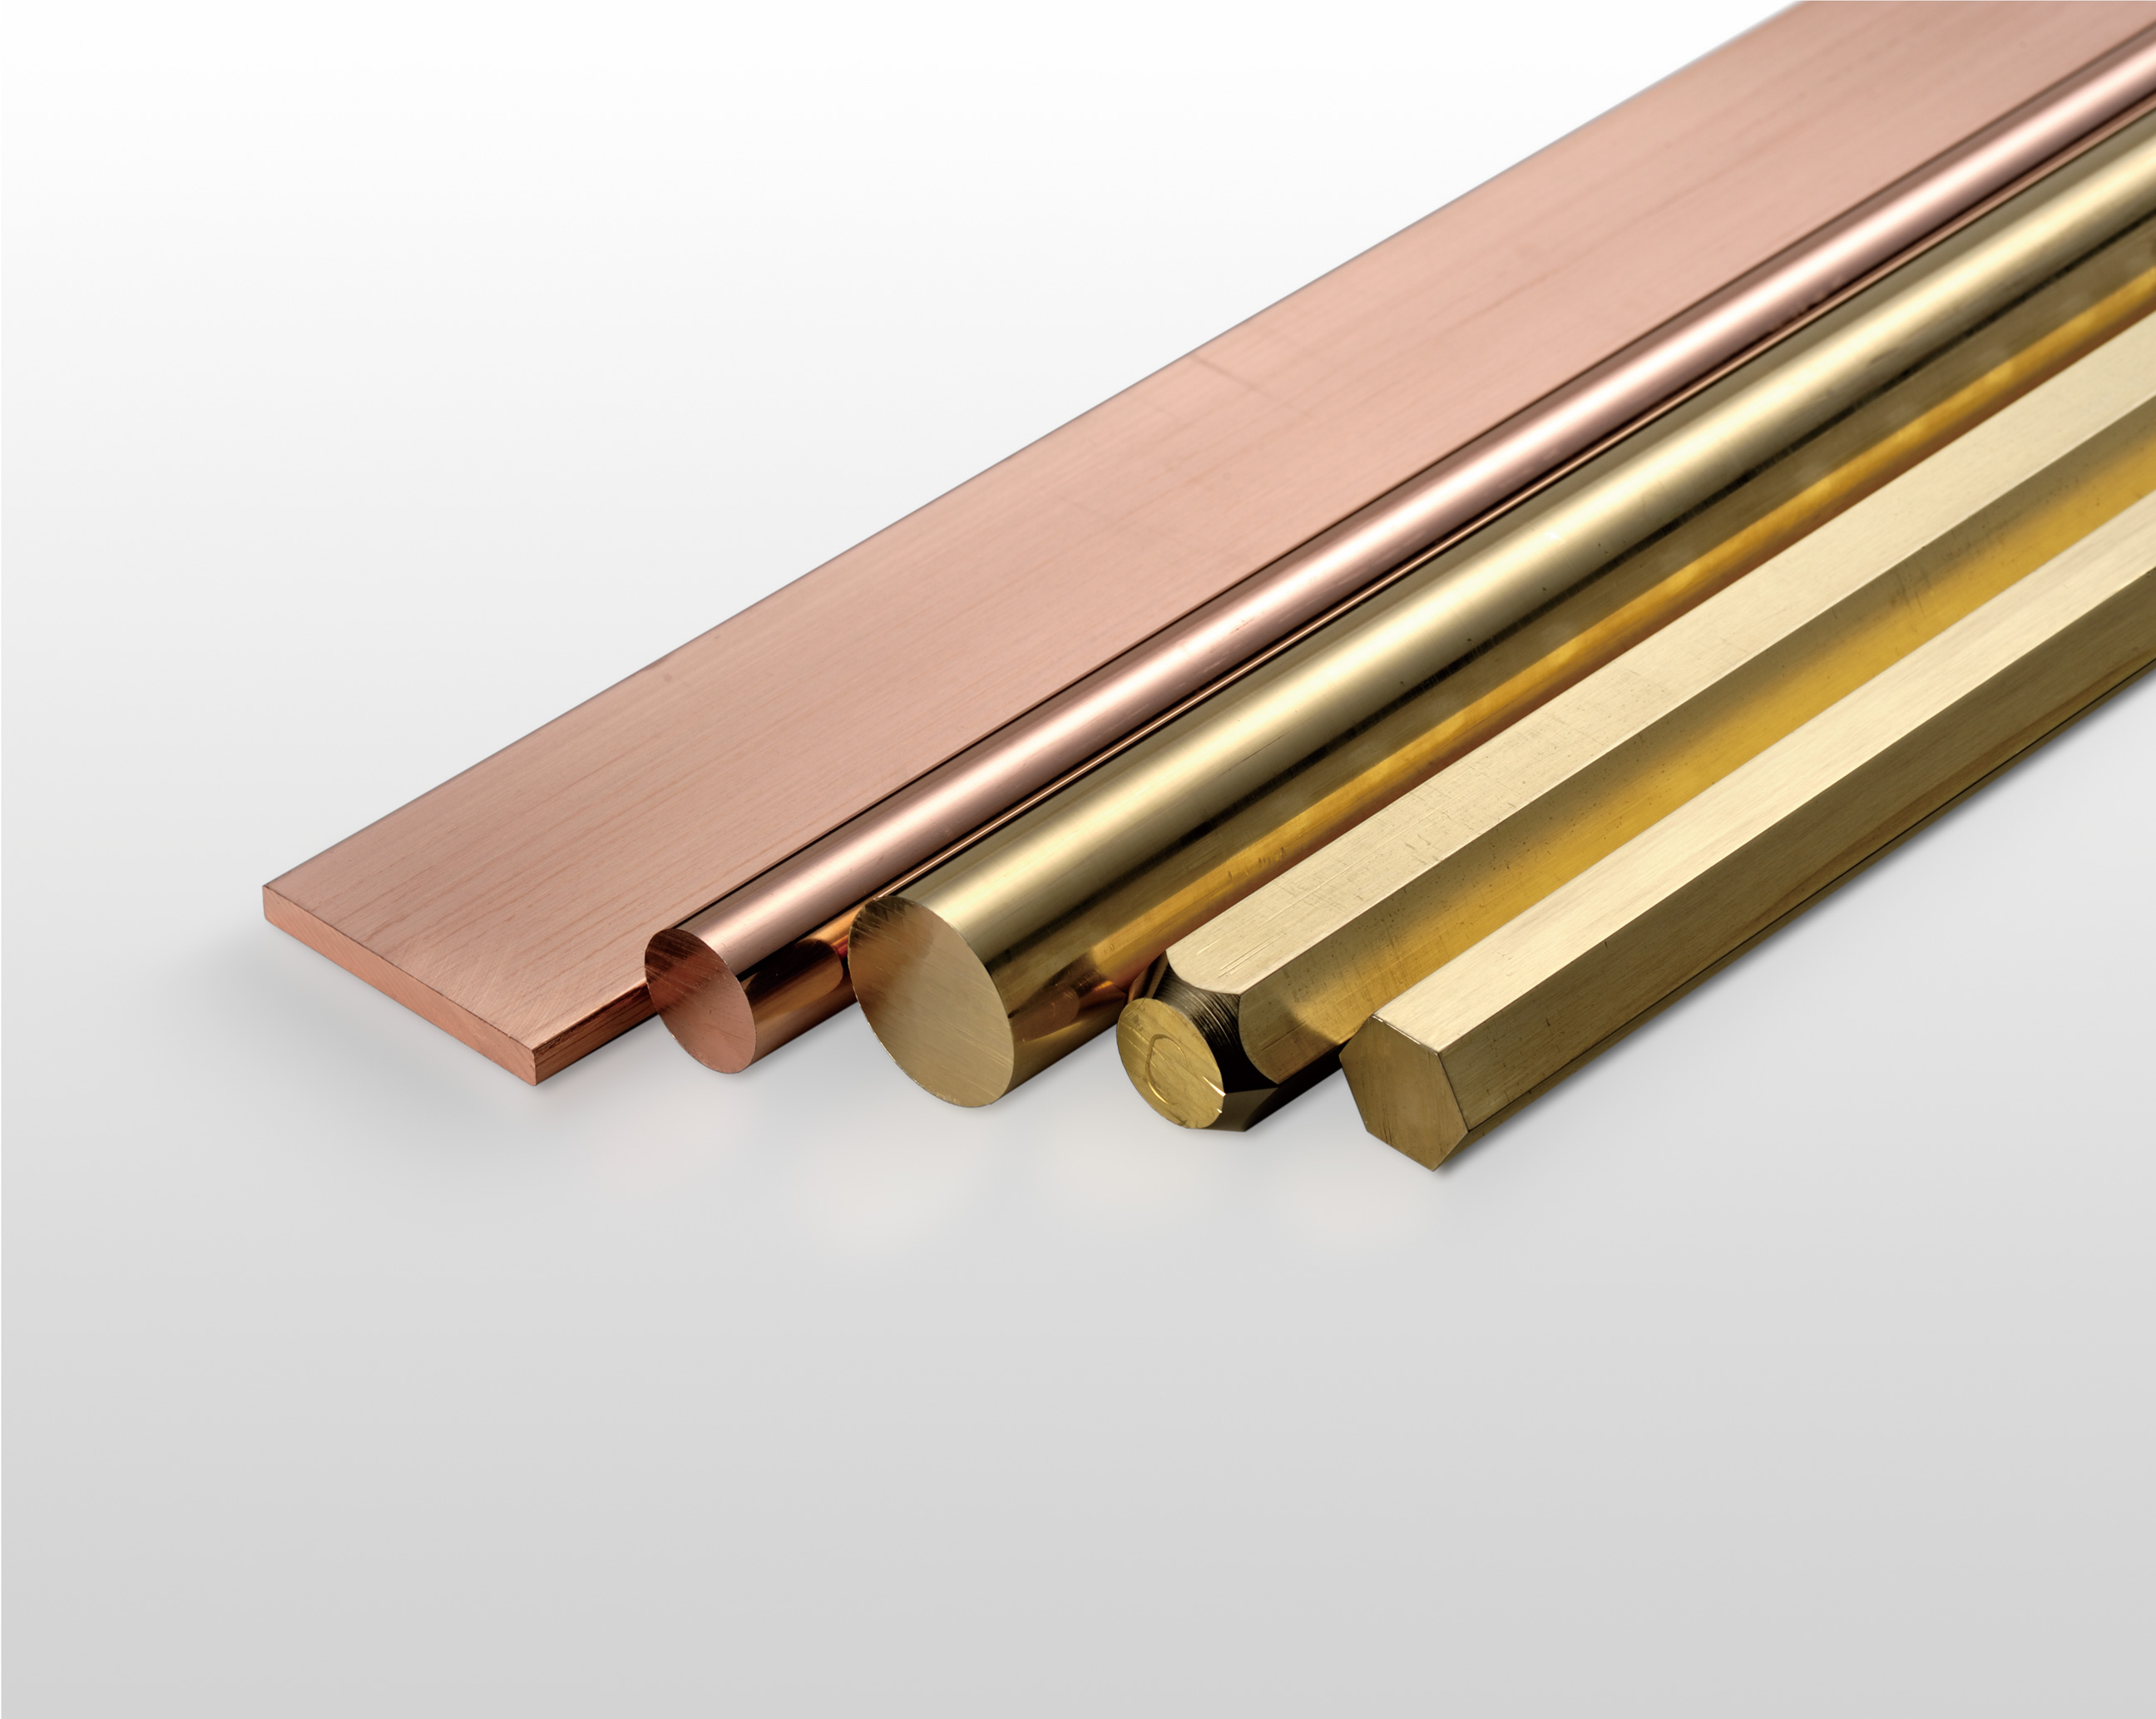 https://www.mitsubishi-copper.com/jp/assets/img/products/brass/pic-1.jpg